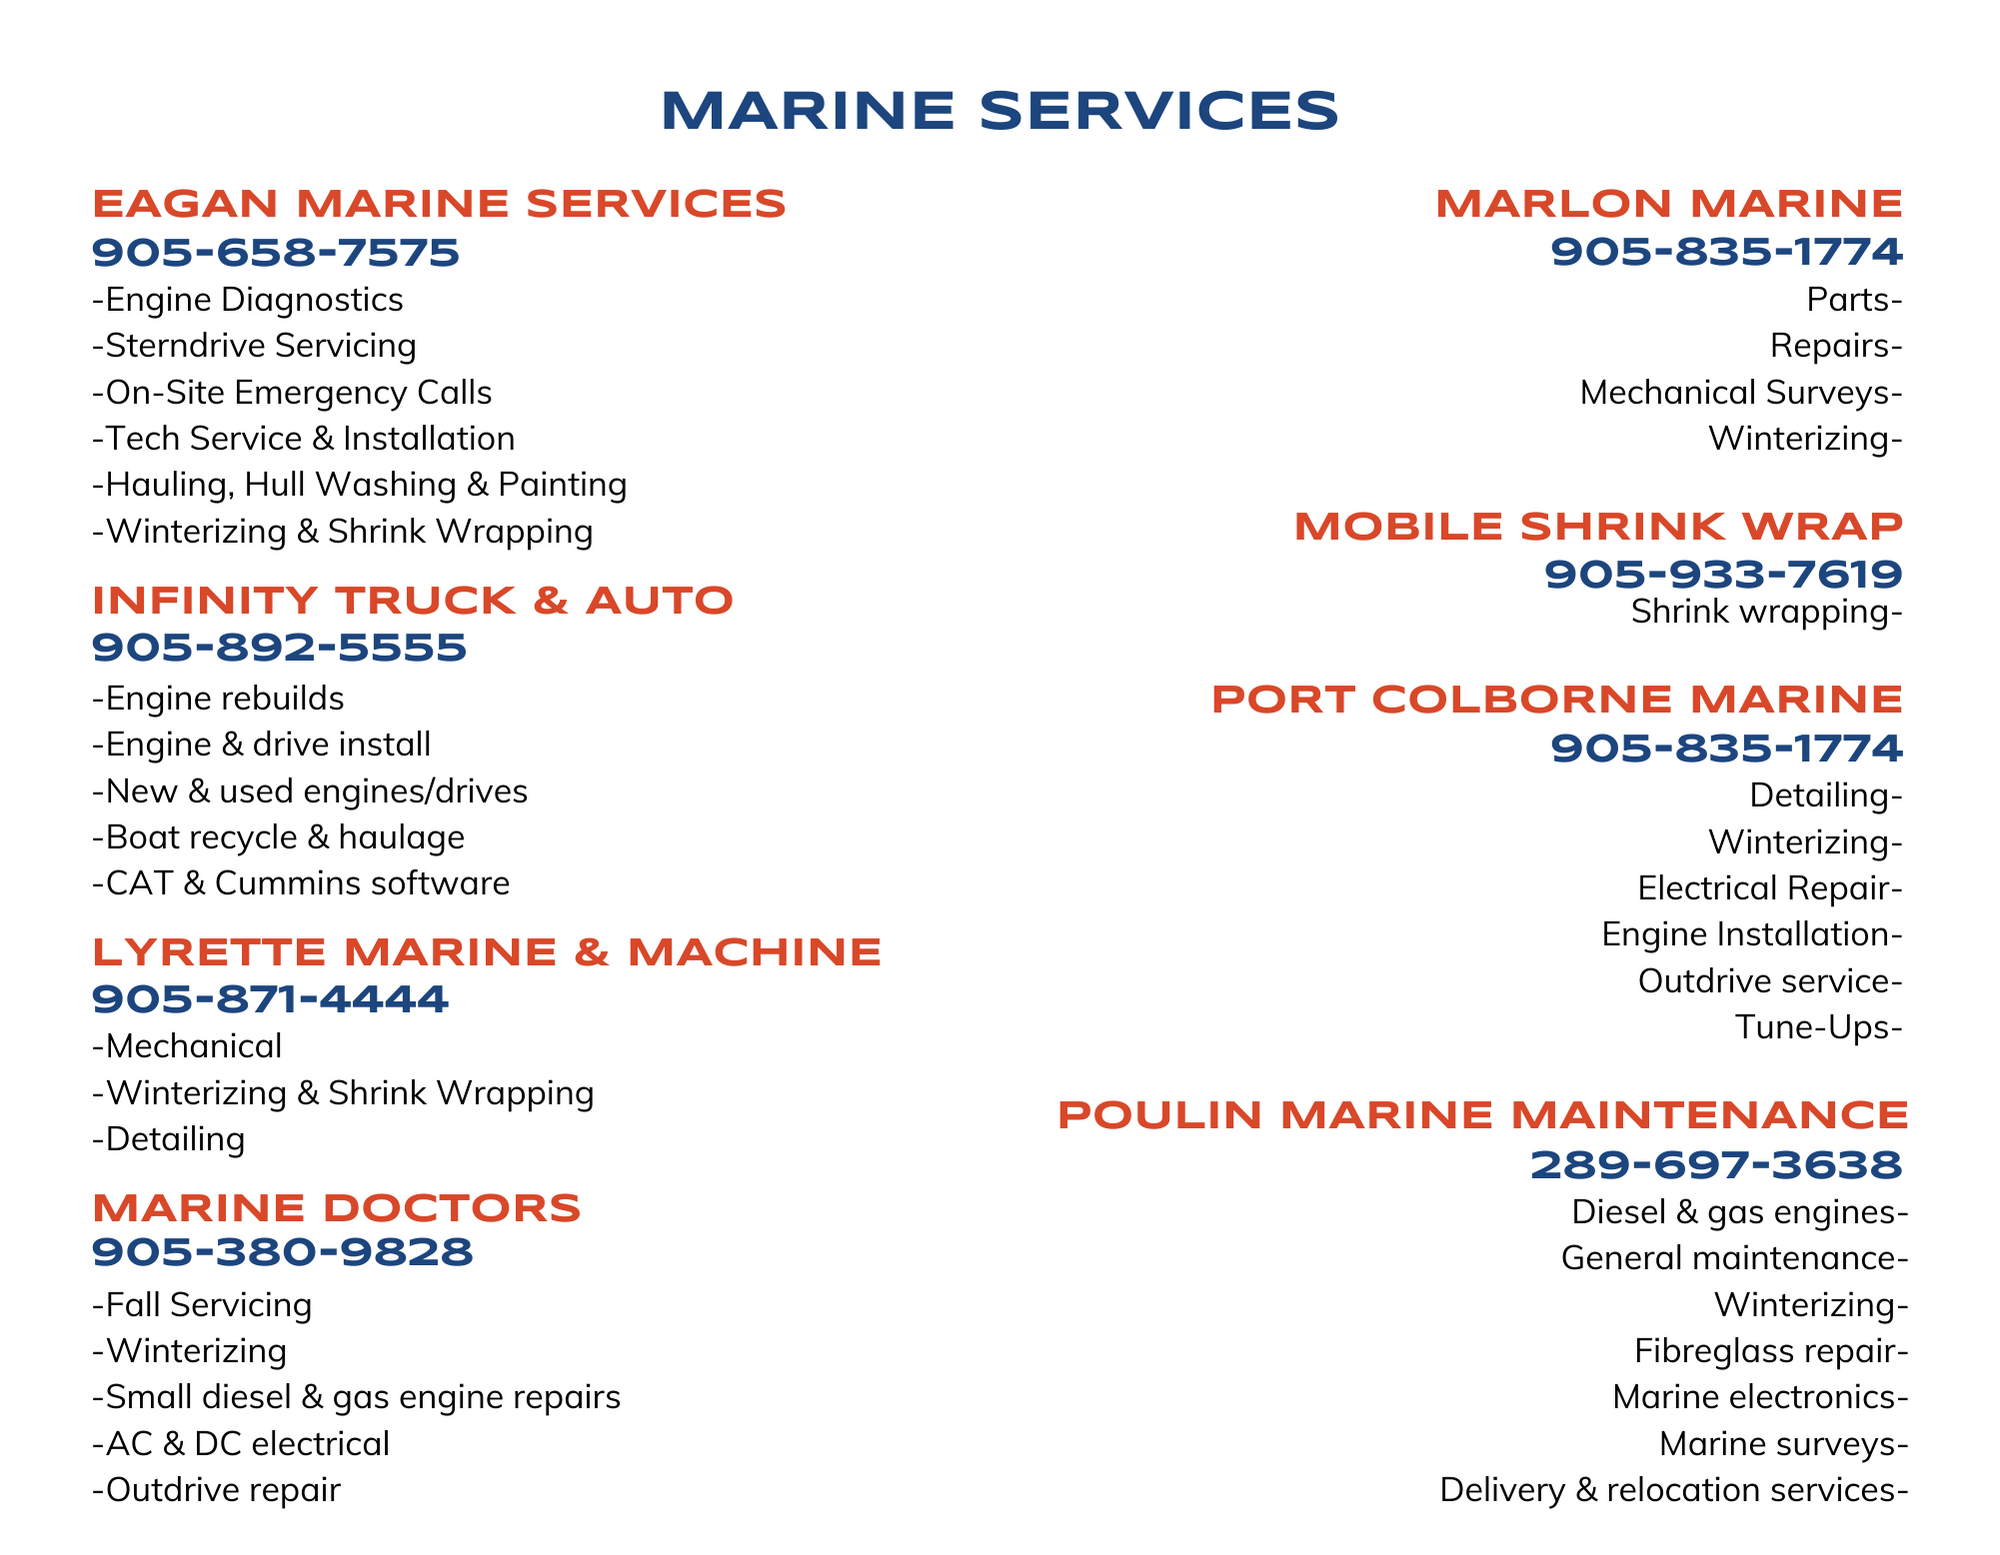 List of marine services available